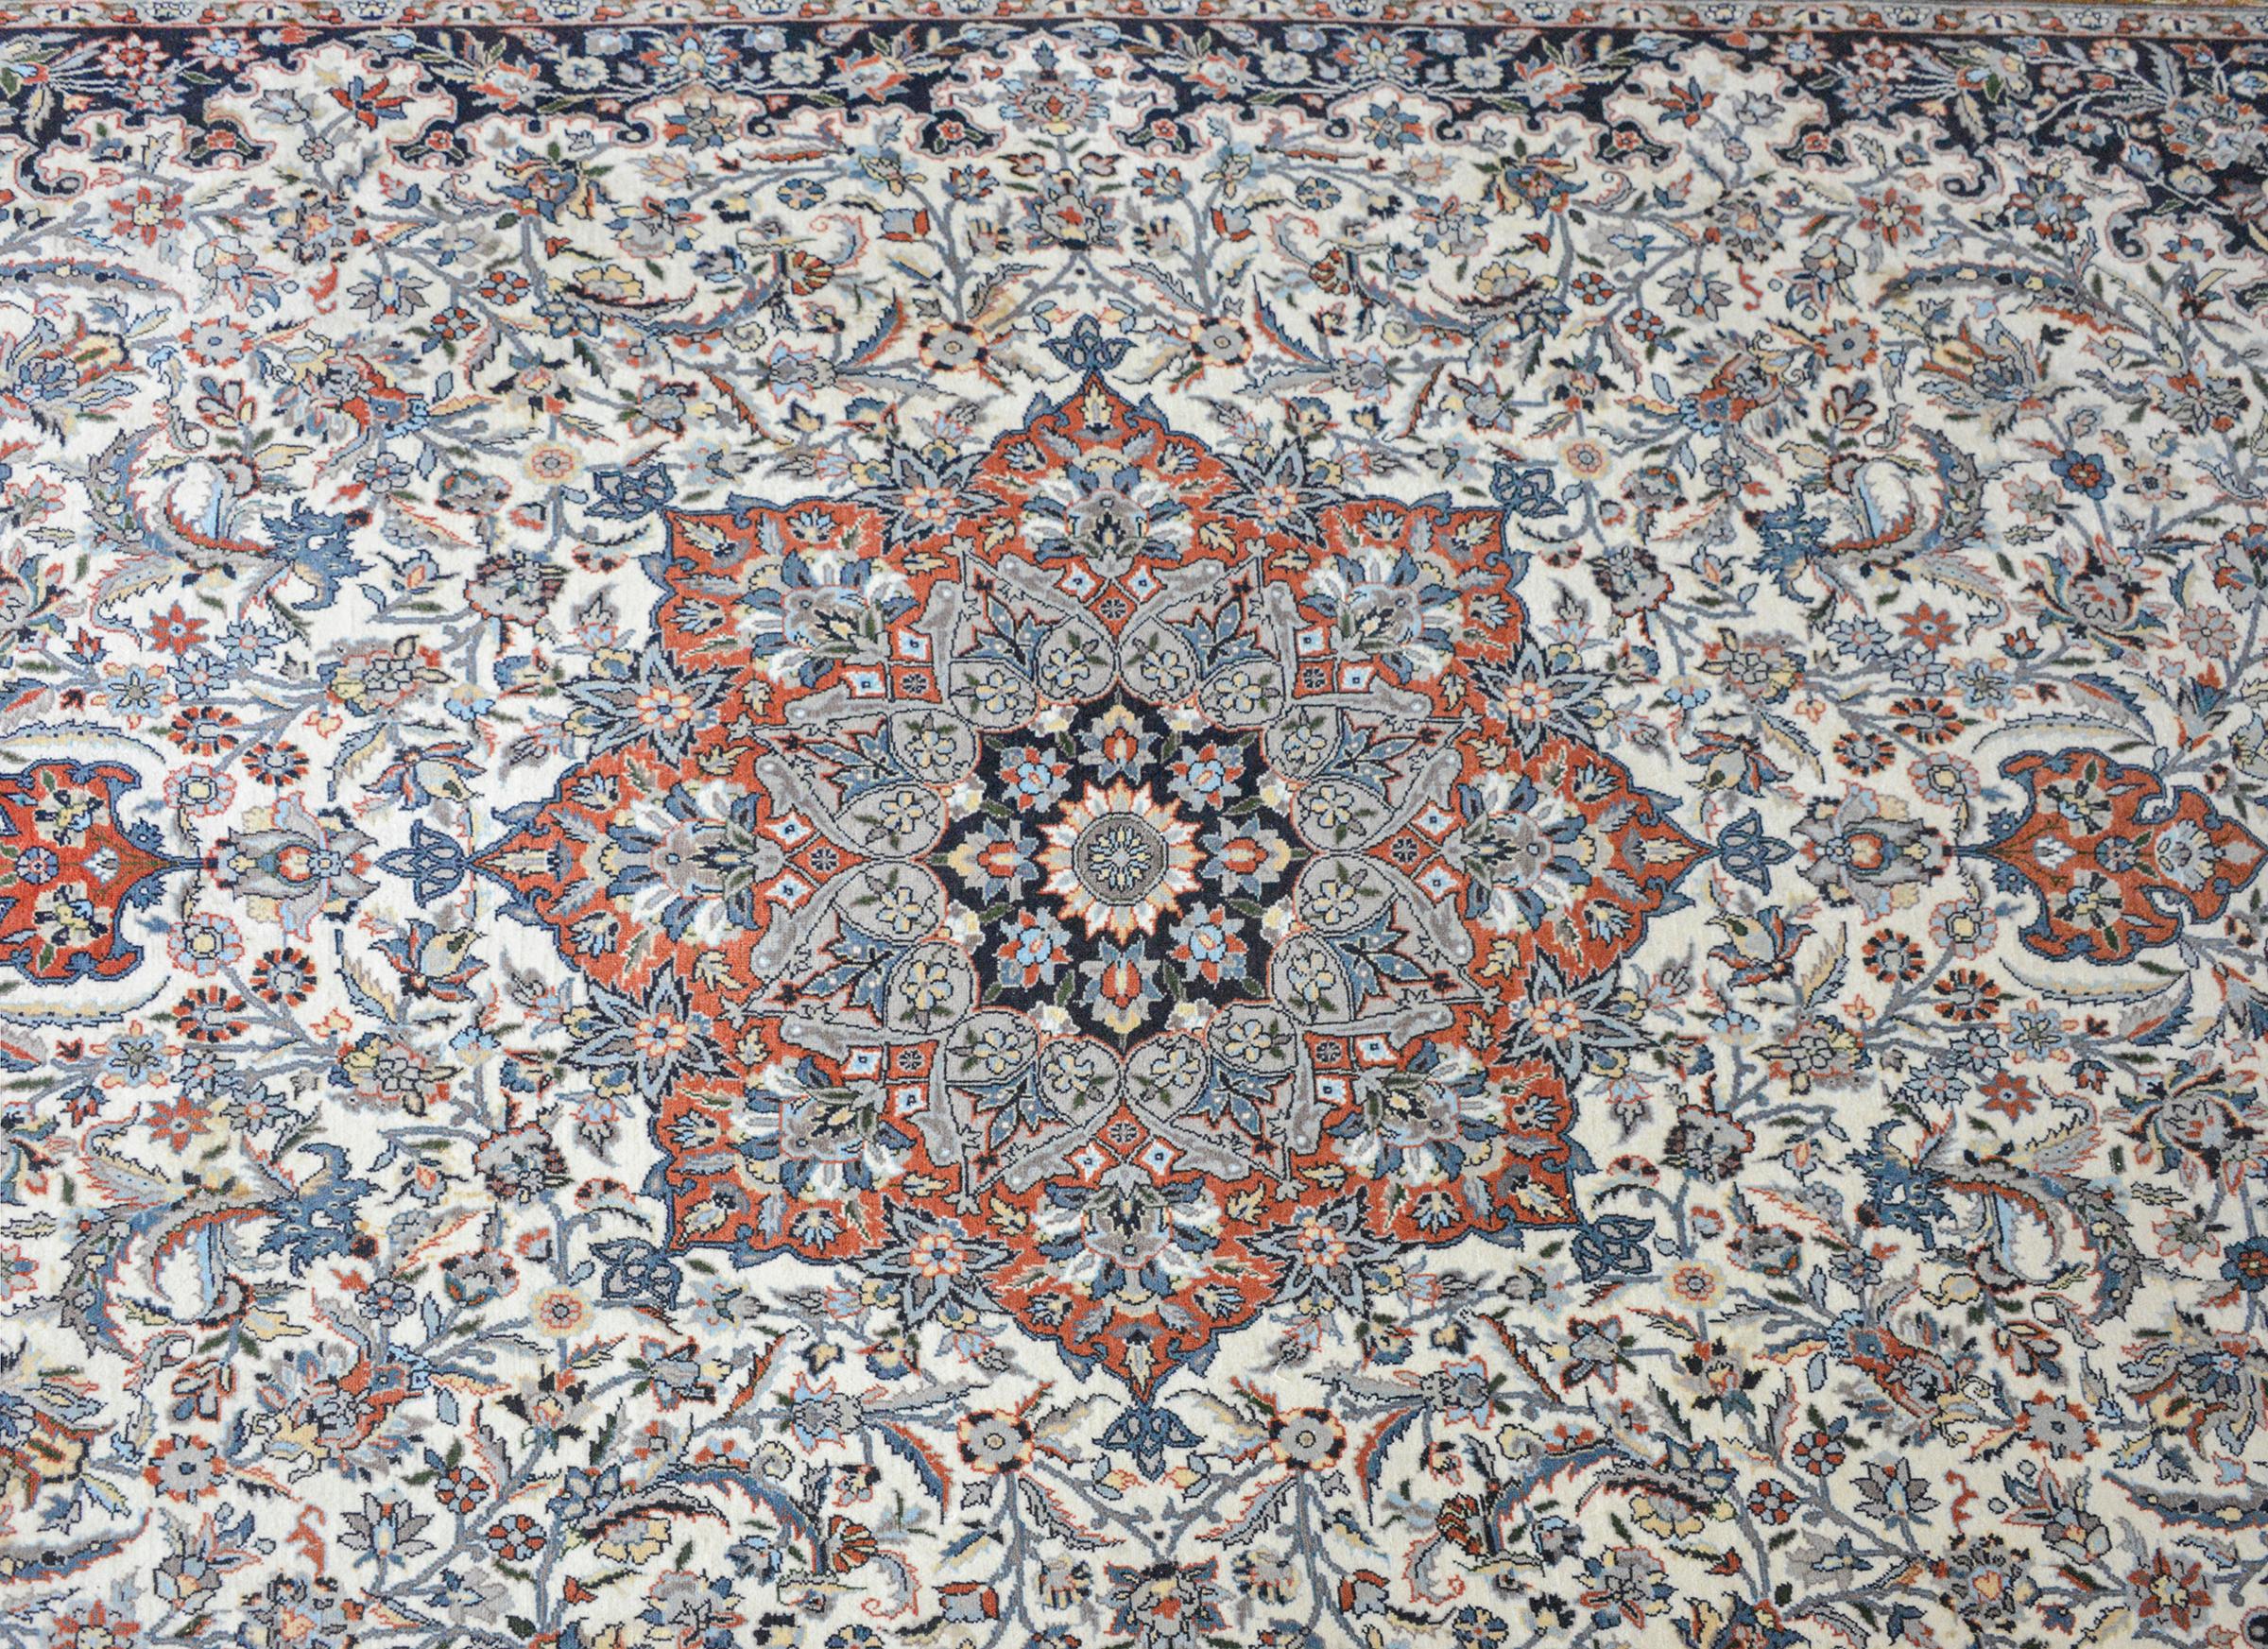 A beautiful and mesmerizing vintage Persian Tabriz rug with a large central floral medallion with amidst a tightly woven field of more scrolling vines and flowers and surrounded by a wide border with more large-scale flowers and vines.